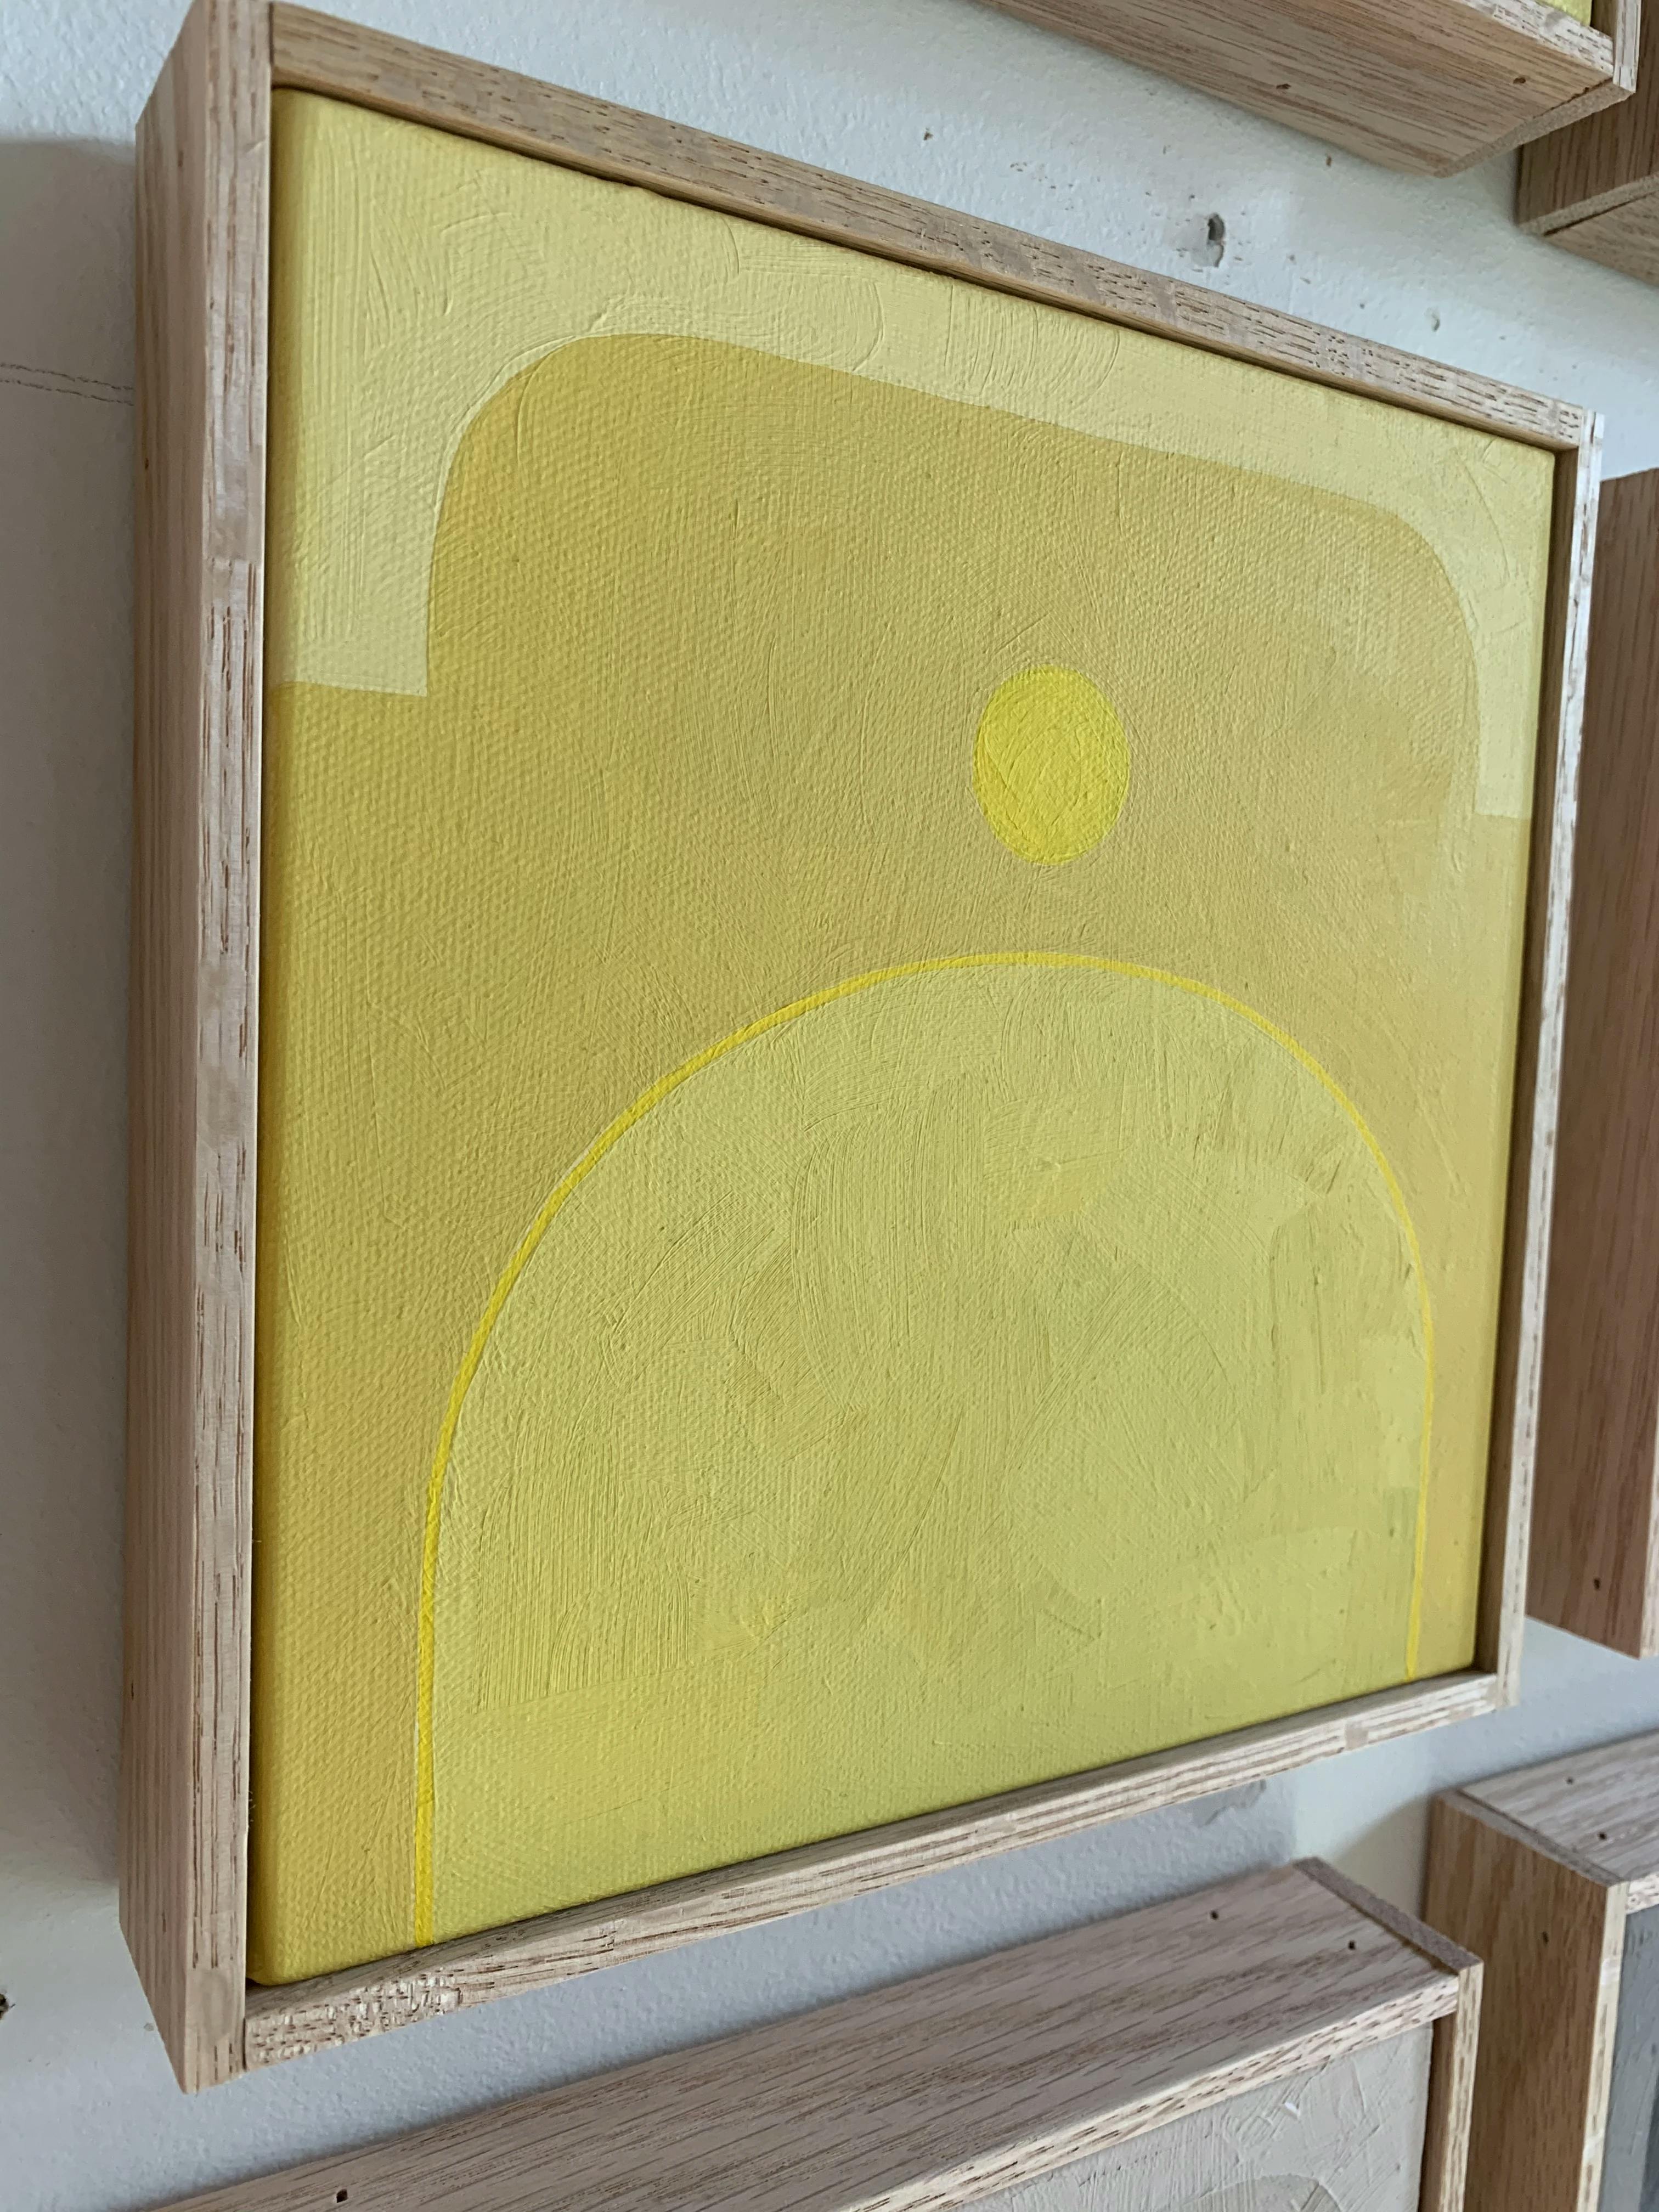 A close-up of a minimalist yellow painting by artist Carla Weeks.